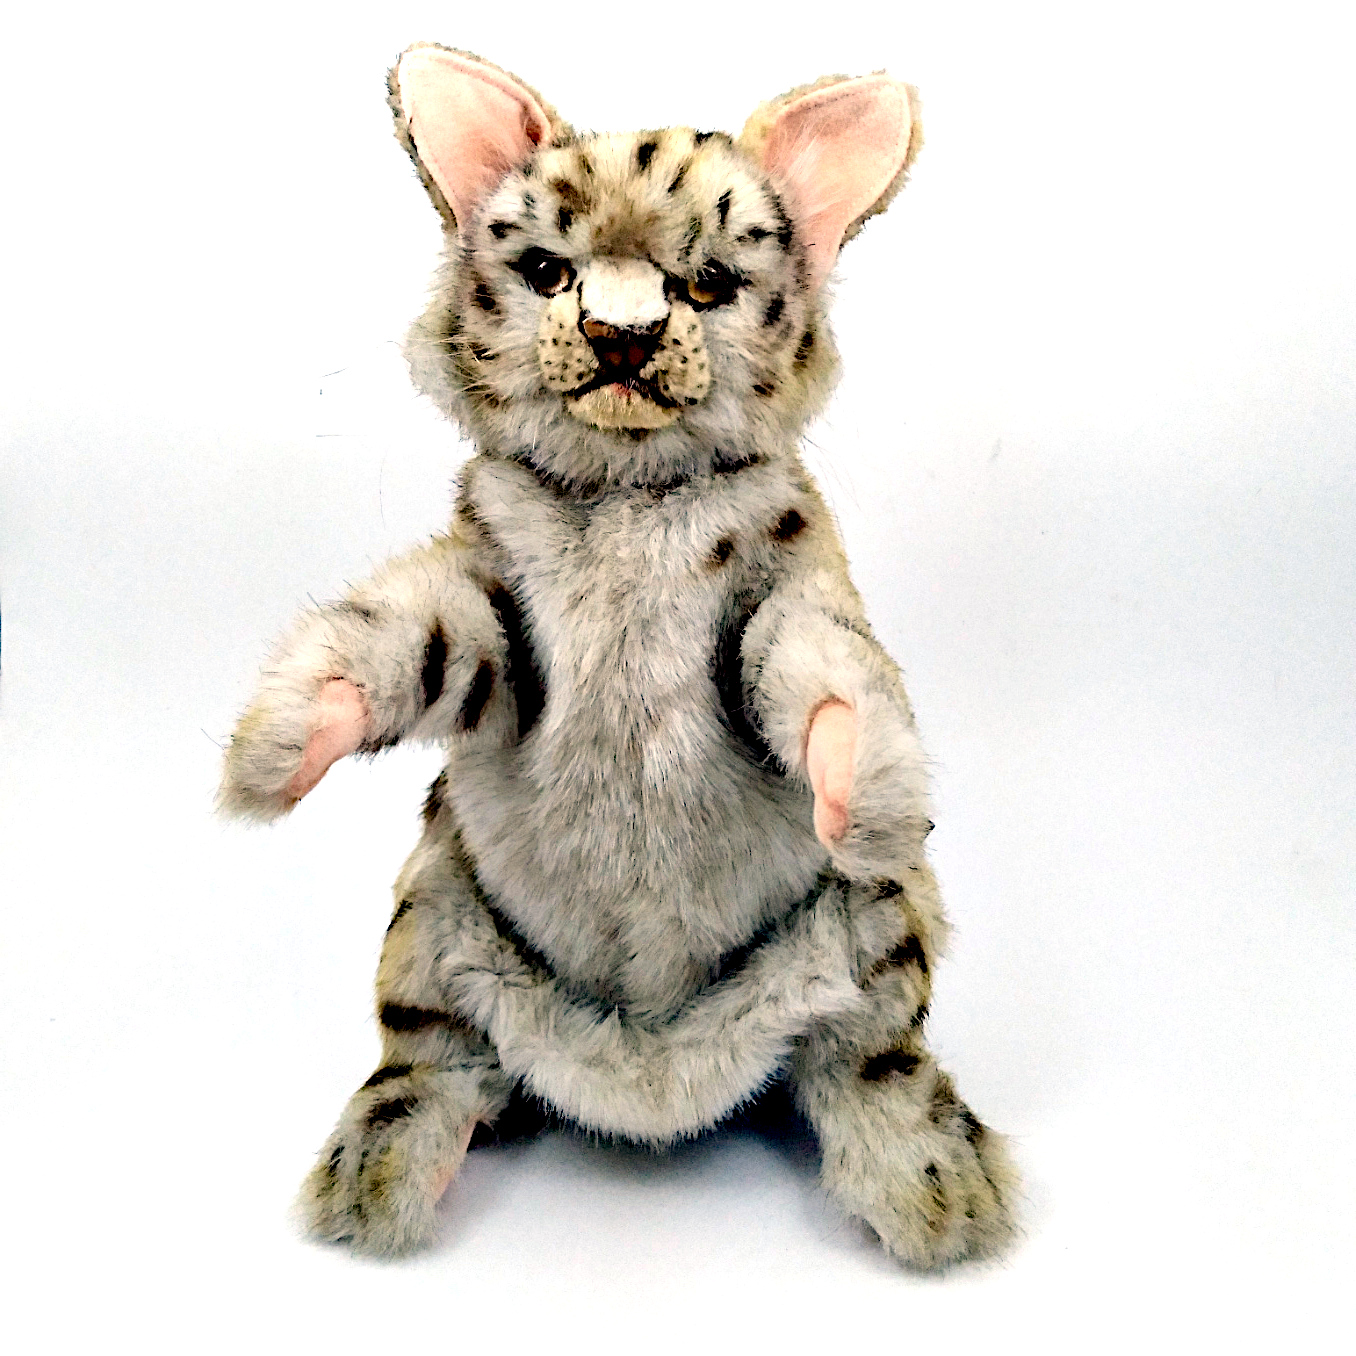 This Leopard Hand Puppet by Hansa True to Life Look Soft Plush Animal Learning Toy is made with love by Premier Homegoods! Shop more unique gift ideas today with Spots Initiatives, the best way to support creators.